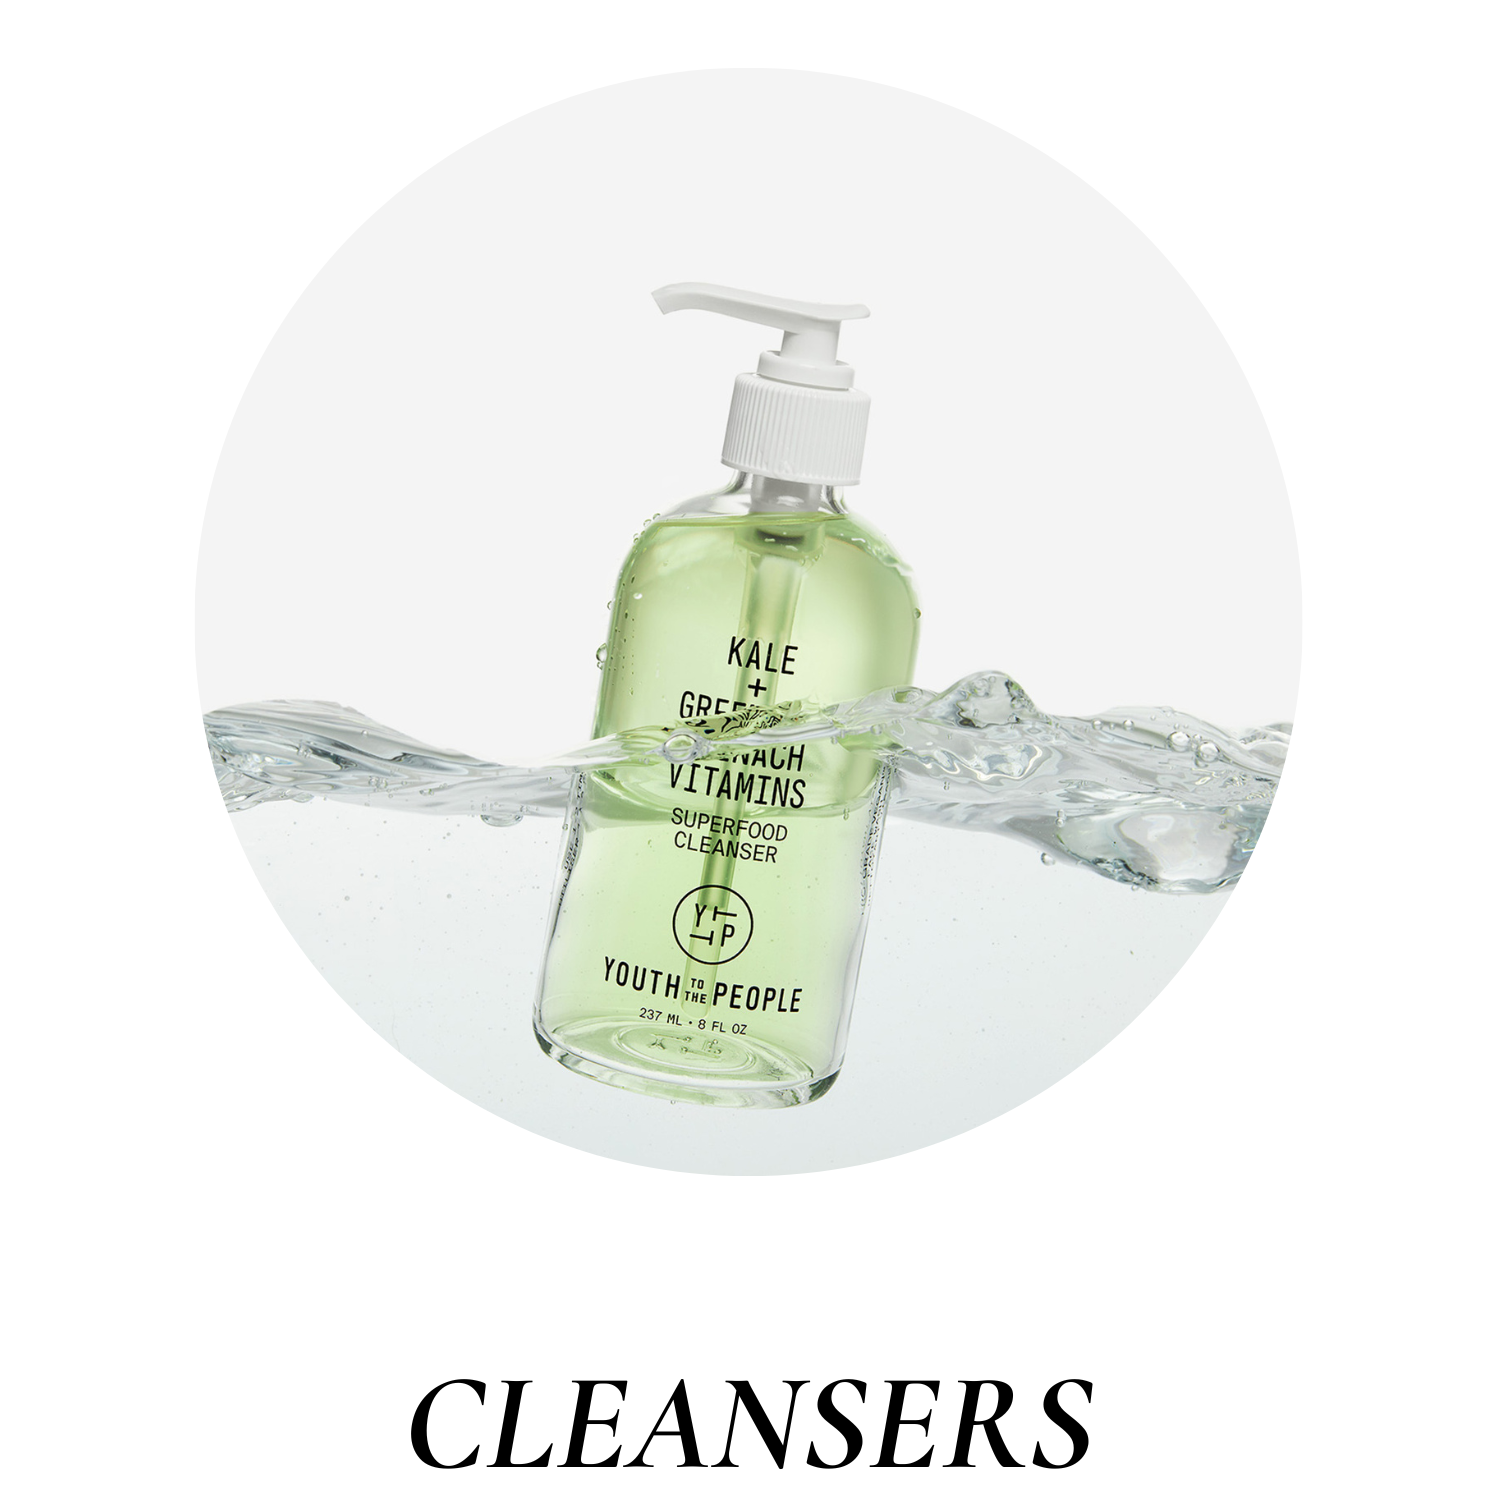 YTTP CLEANSERS